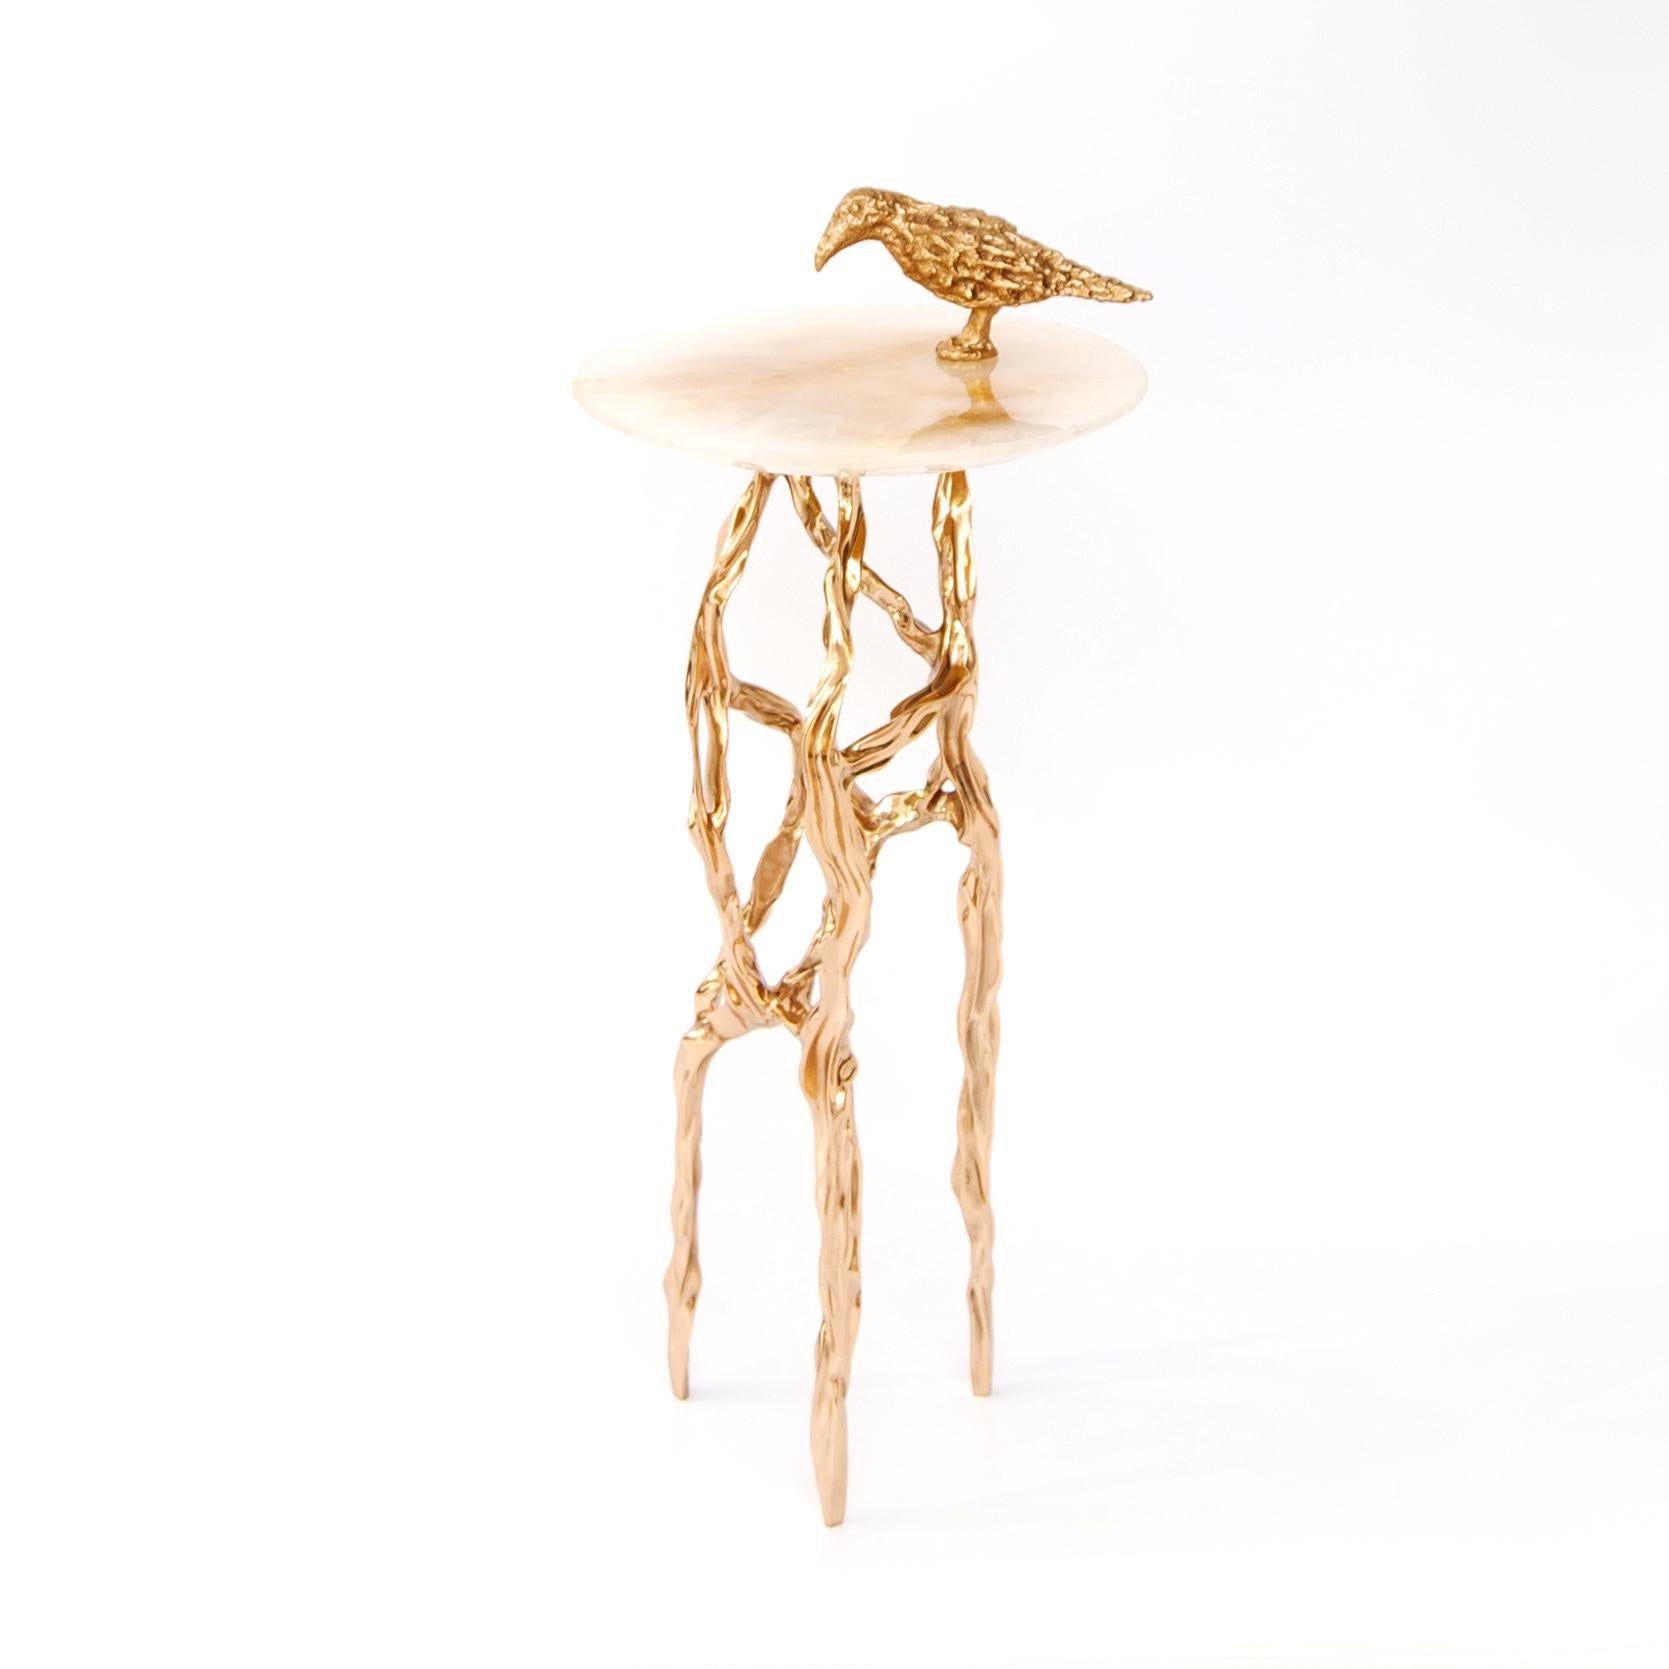 Brazilian Pair of Polished Bronze Side Tables by FAKASAKA Design